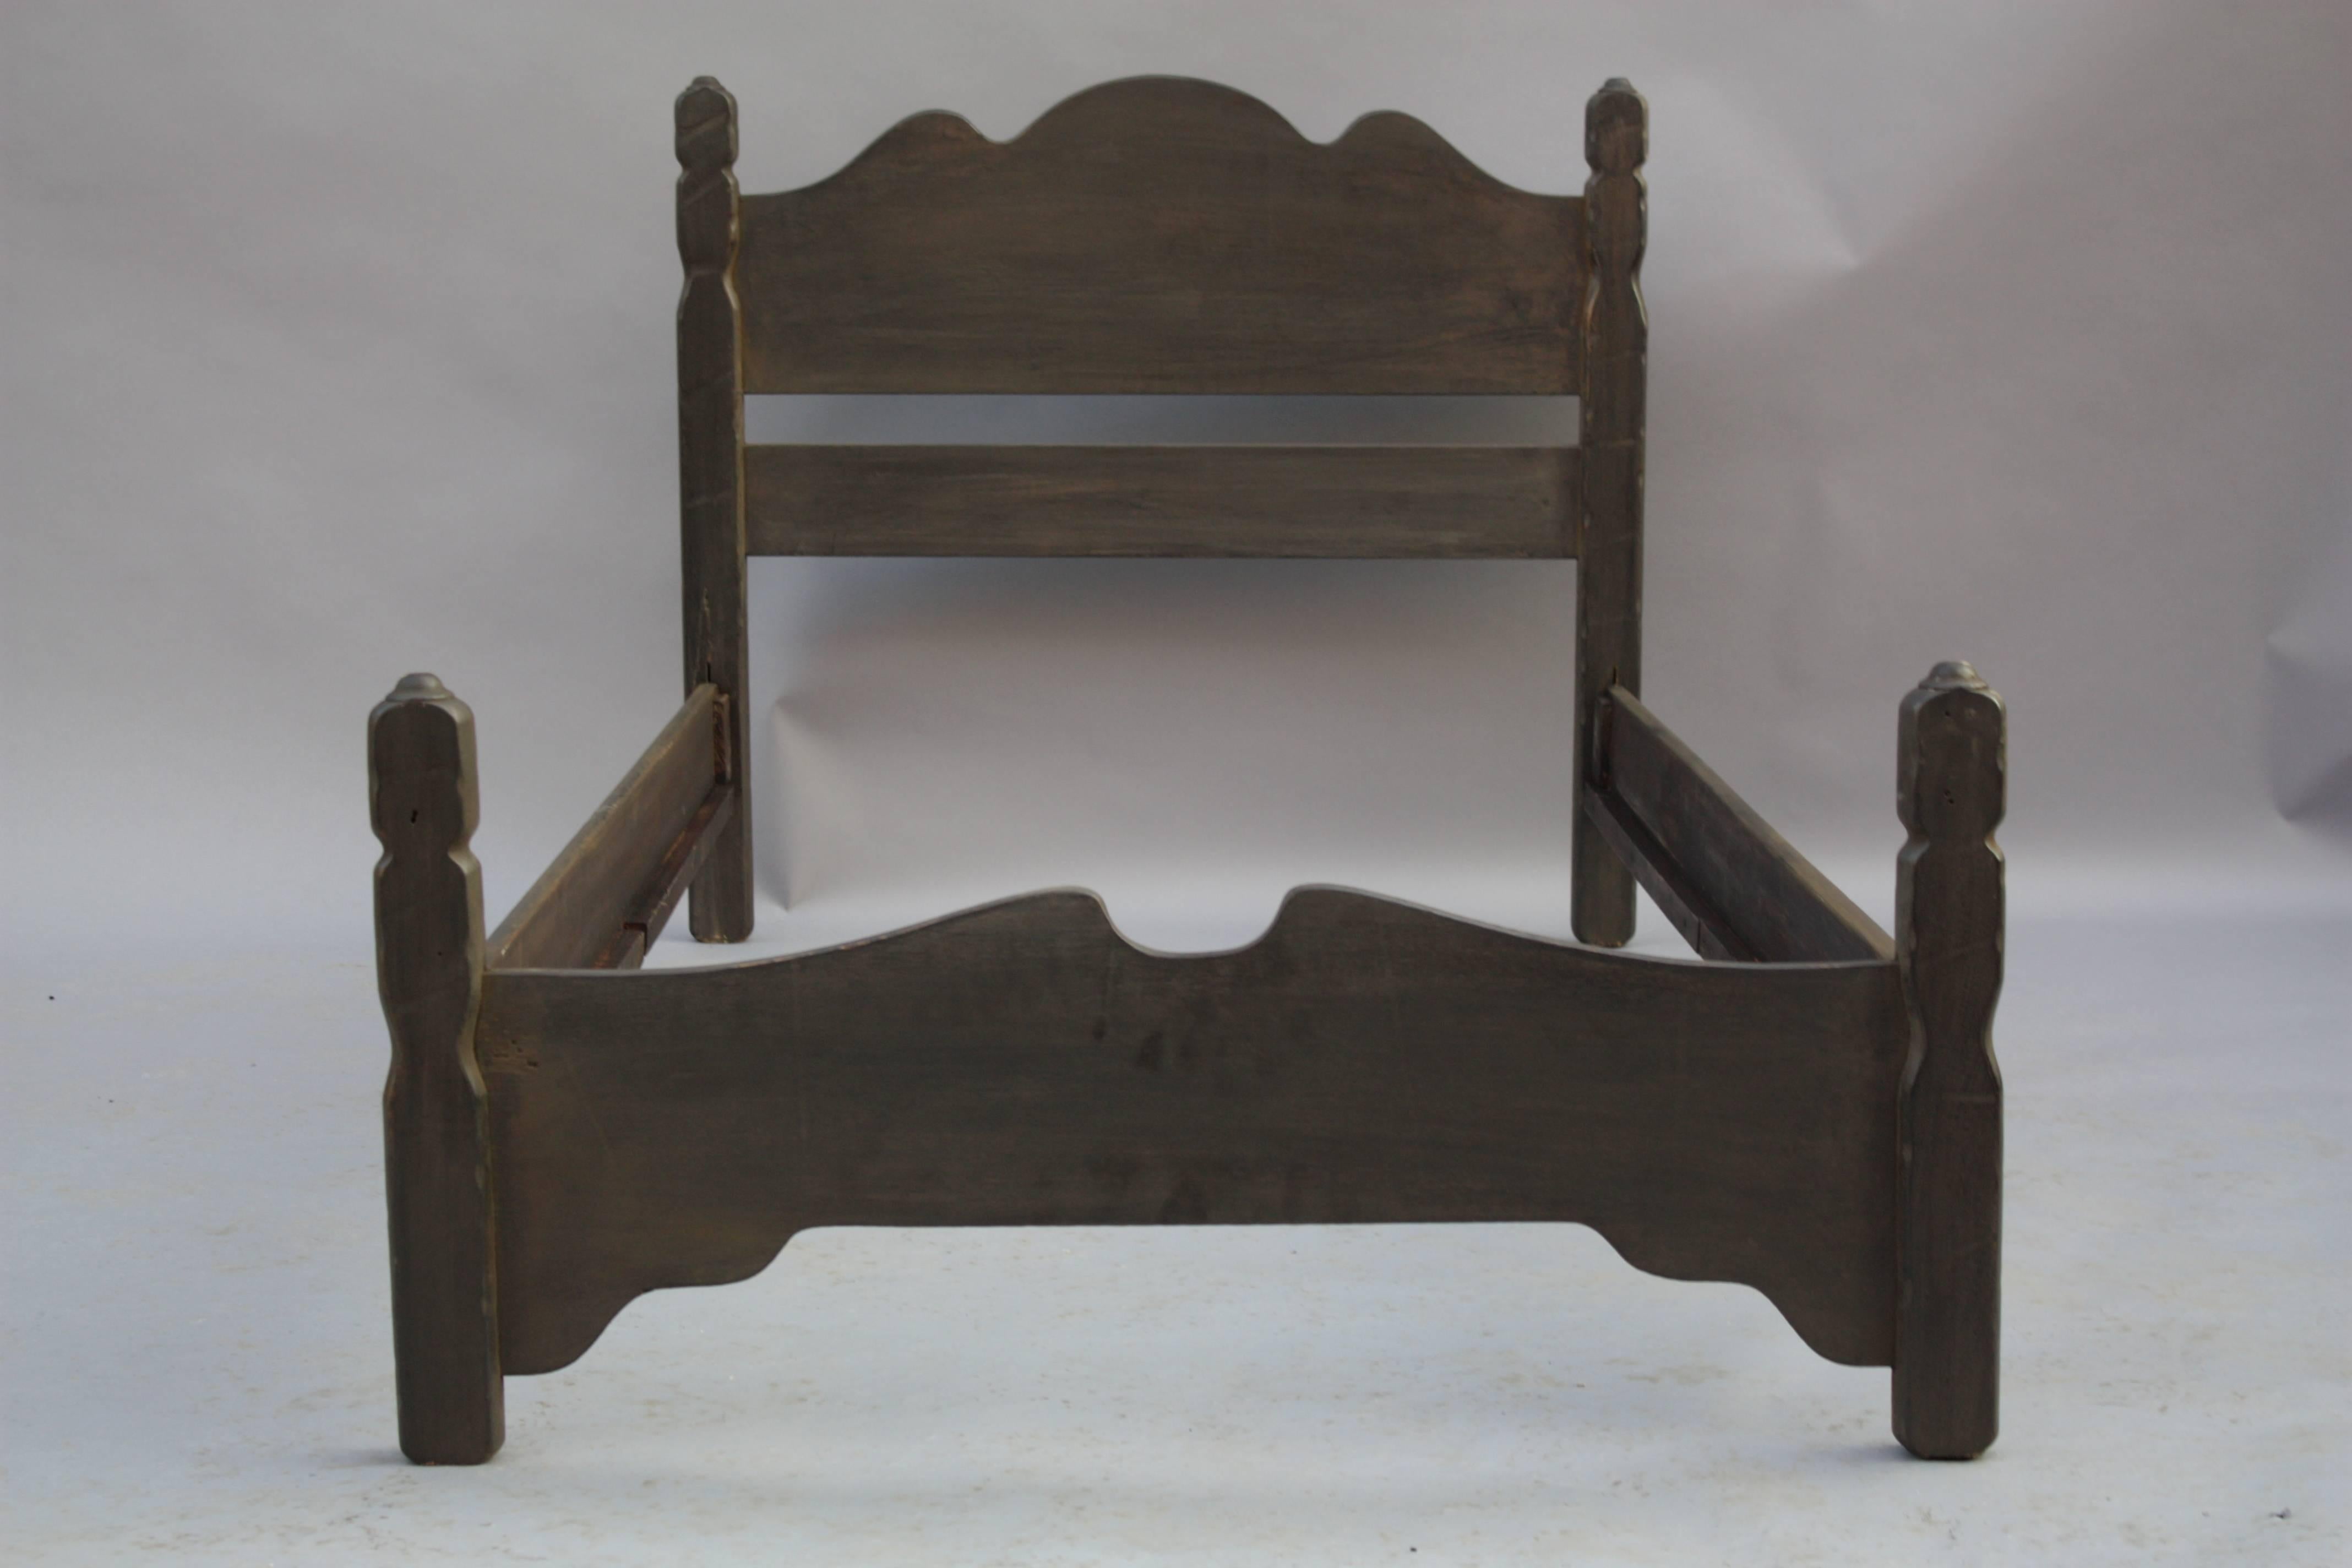 Circa 1930's bed by Barker Bros cie stamped Monterey with horseshoe mark. Restored finish. 
Inside measurements are 38.75 